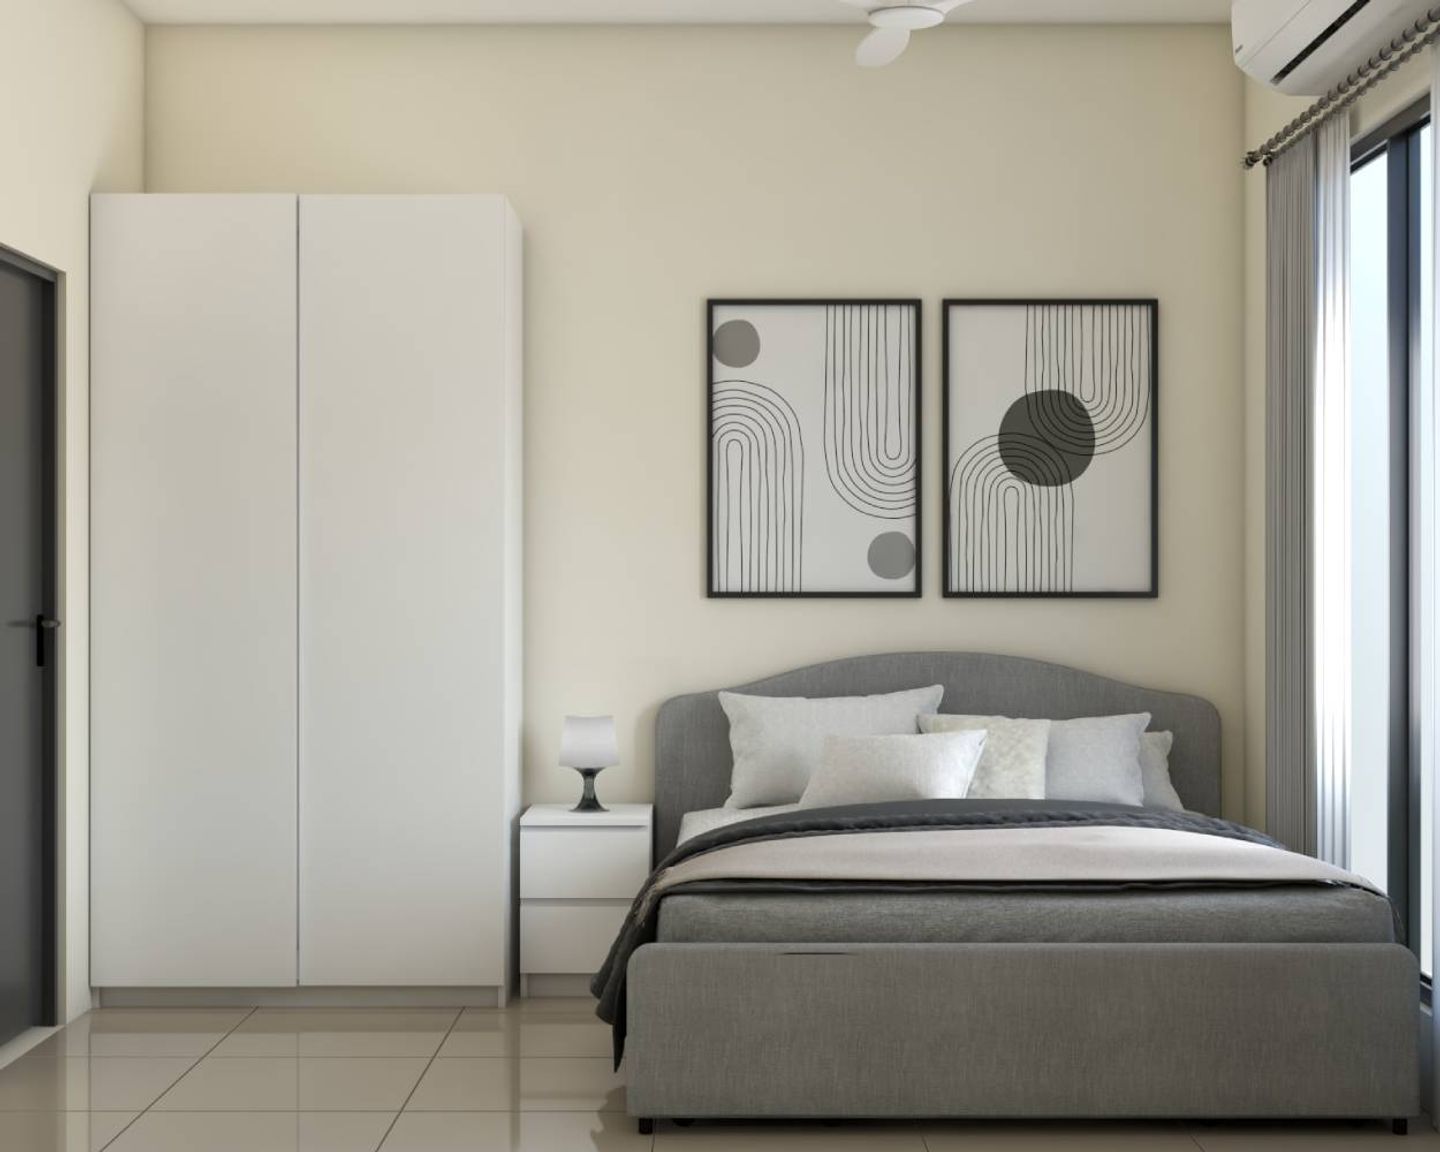 Beige And Grey Minimalist Master Bedroom Design With 2-Door Swing Wardrobe And White Side Table - Livspace